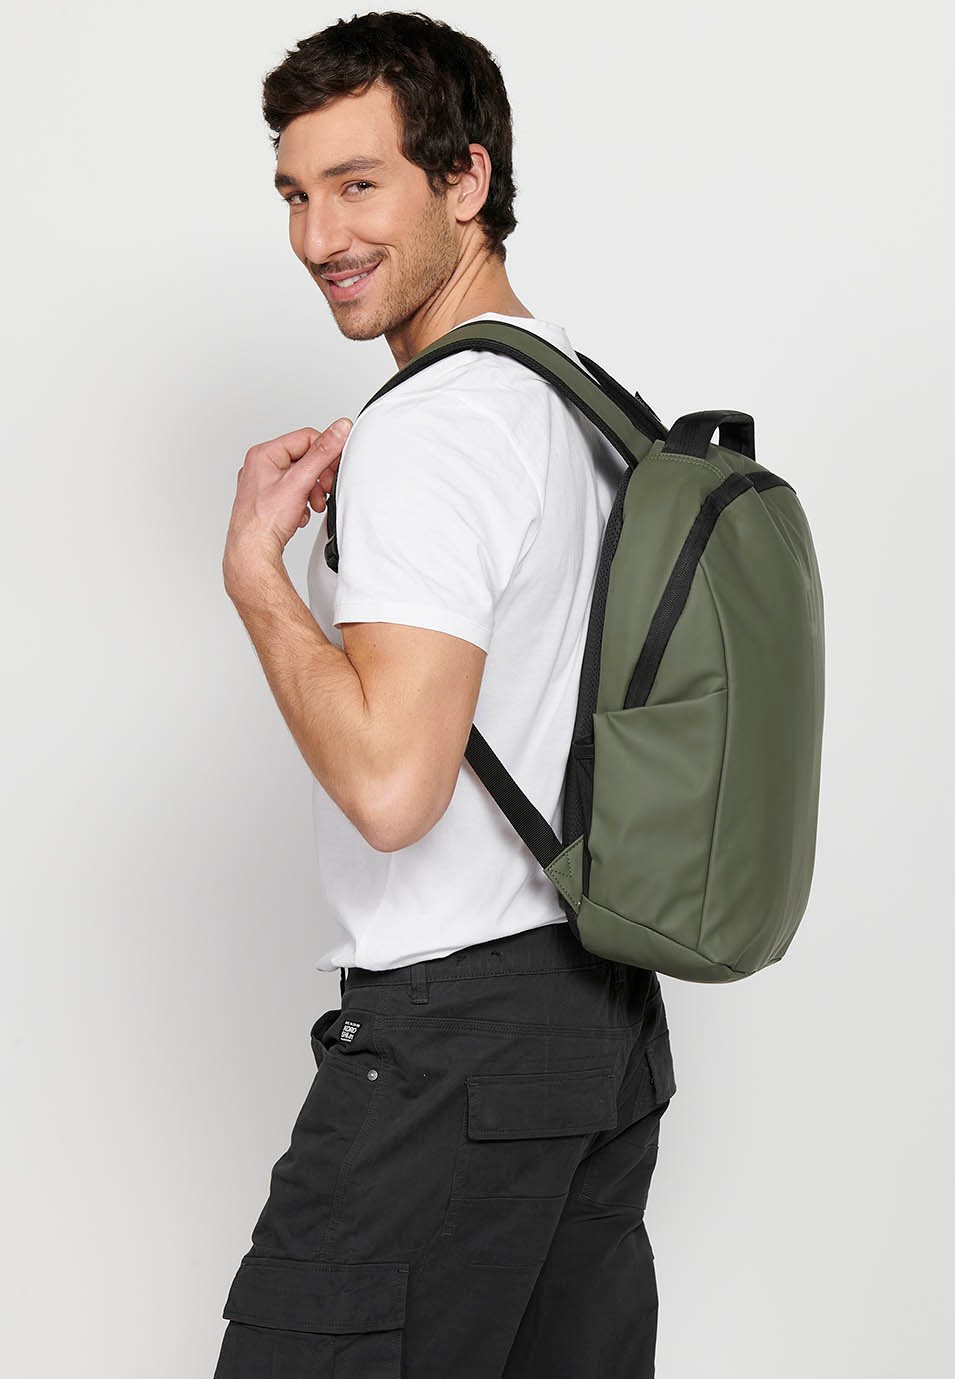 Koröshi Backpack with zipper closure and interior laptop pocket in Khaki color 7